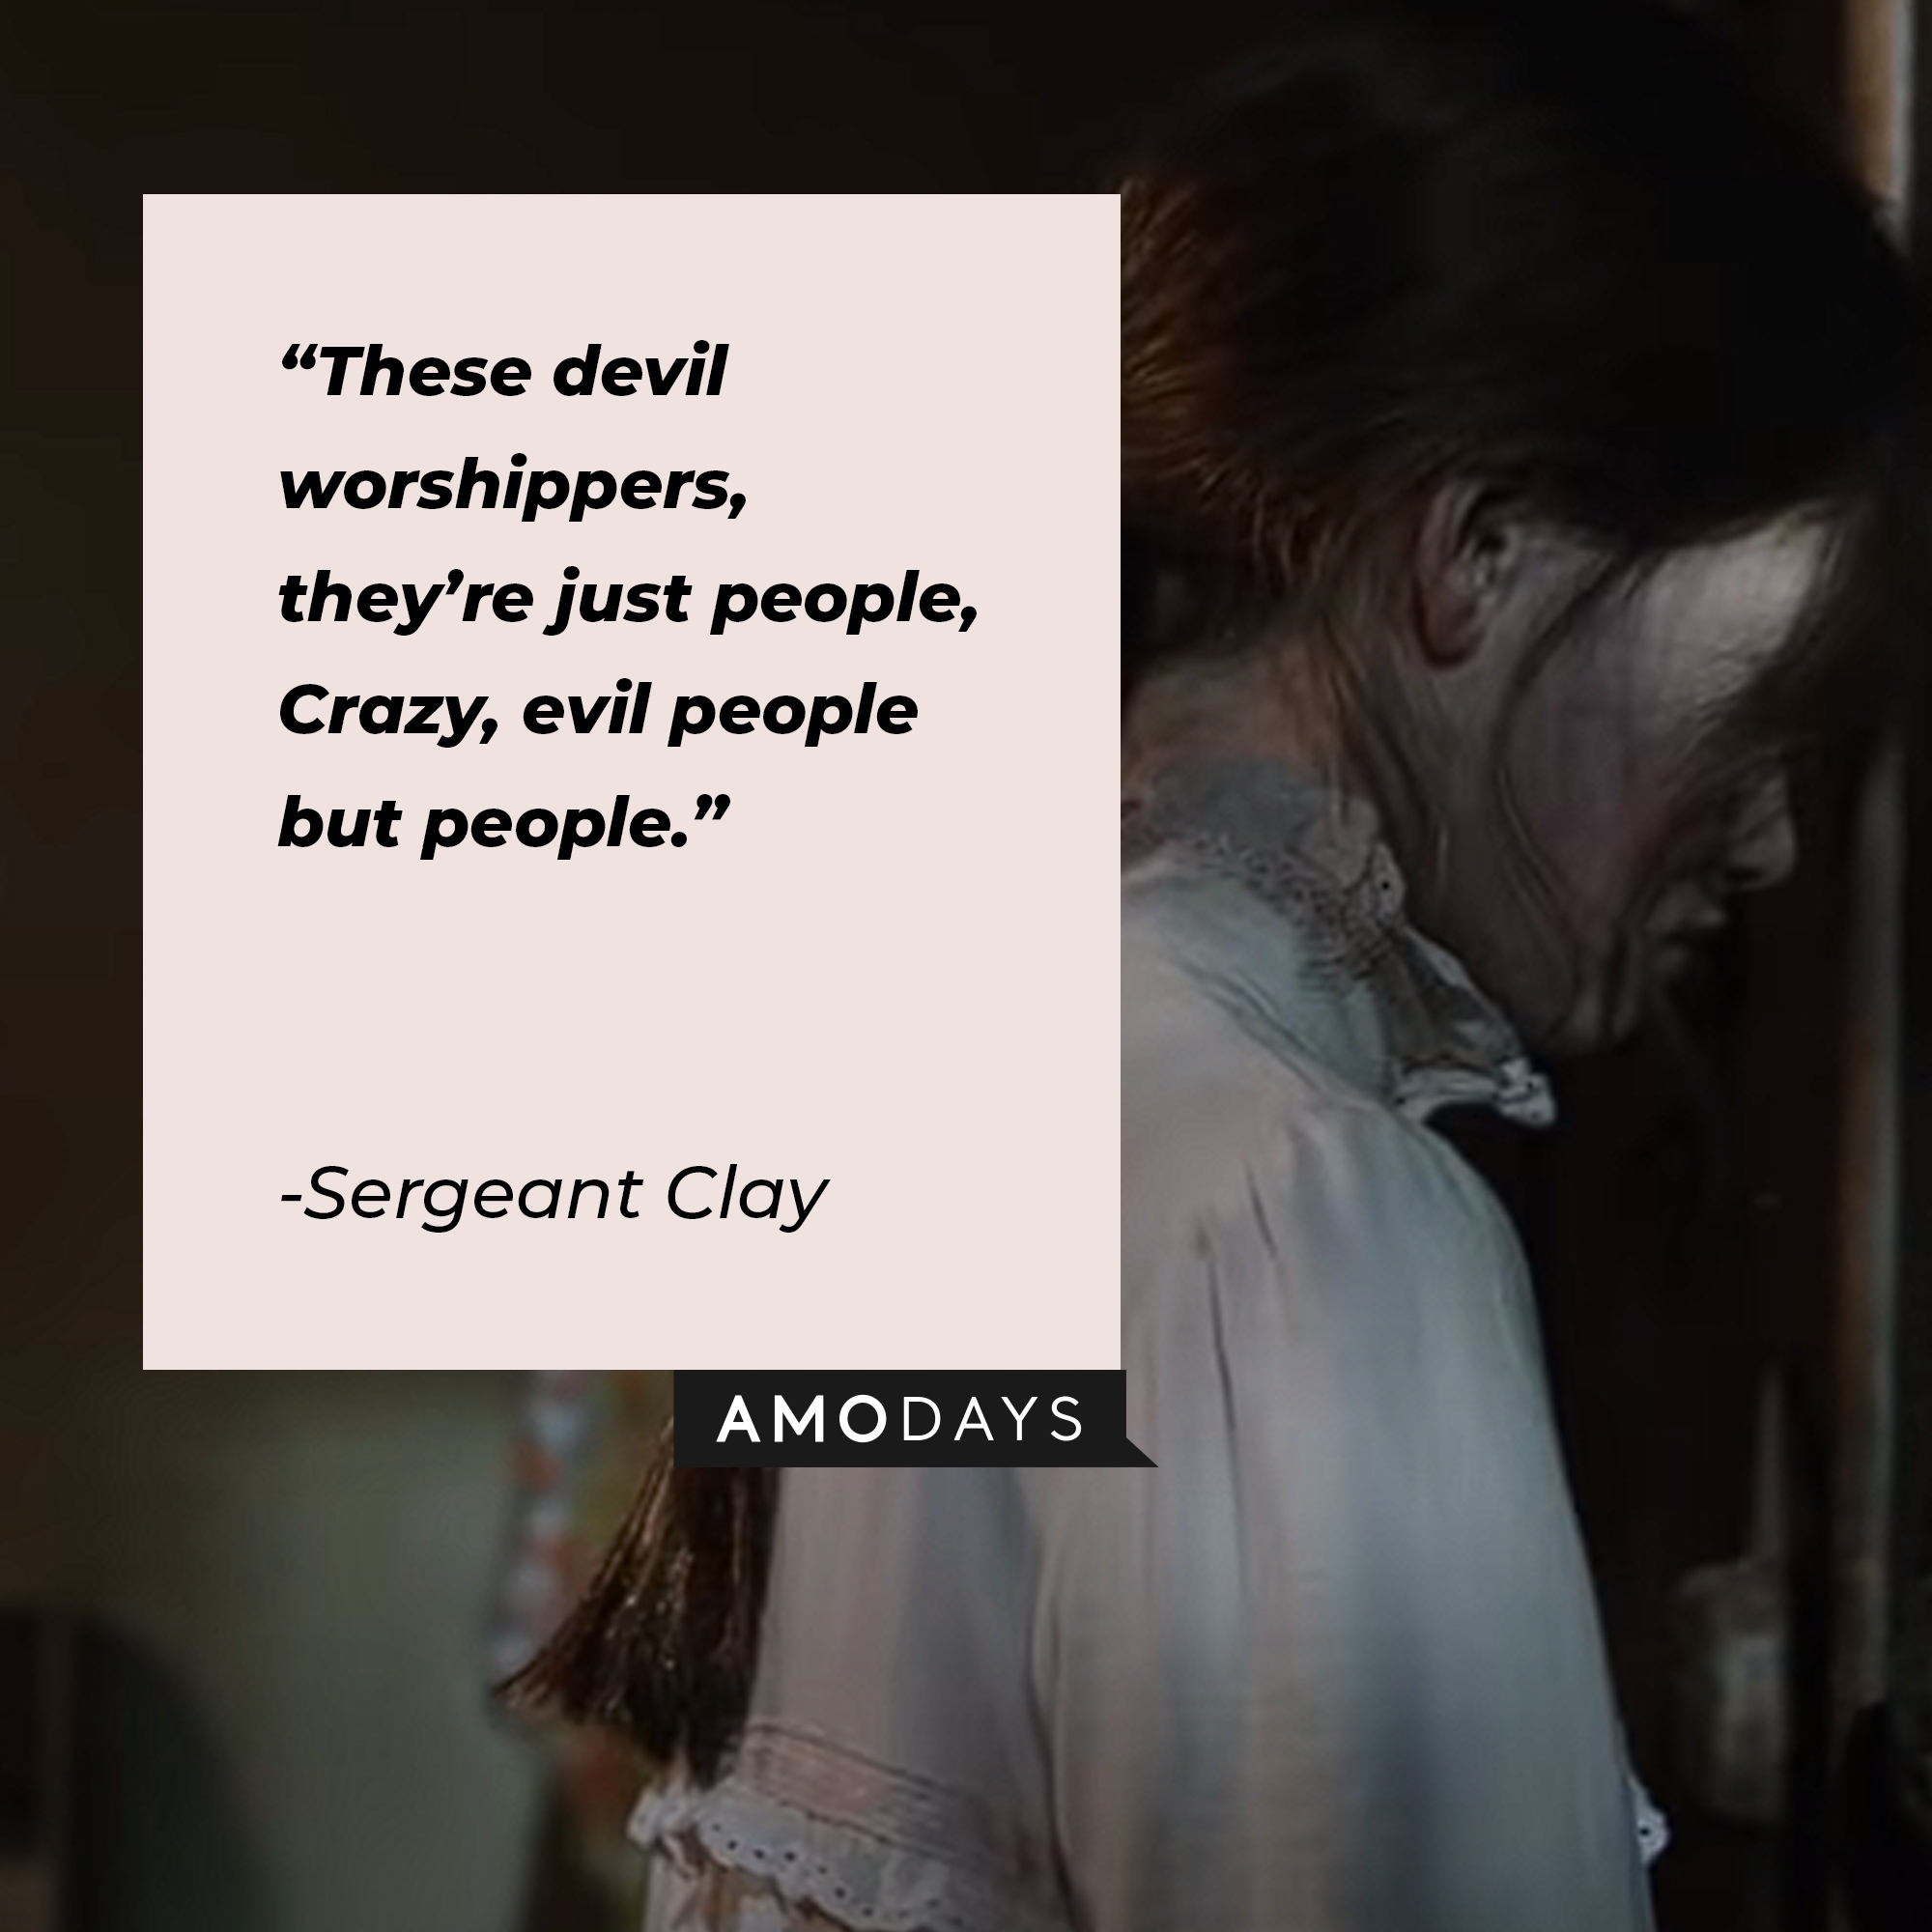 An image of a character from the Conjuring franchise with Sergeant Clay’s quote:“These devil worshippers, they’re just people, Crazy, evil people but people.”  |Source: youtube.com/WarnerBrosPicture